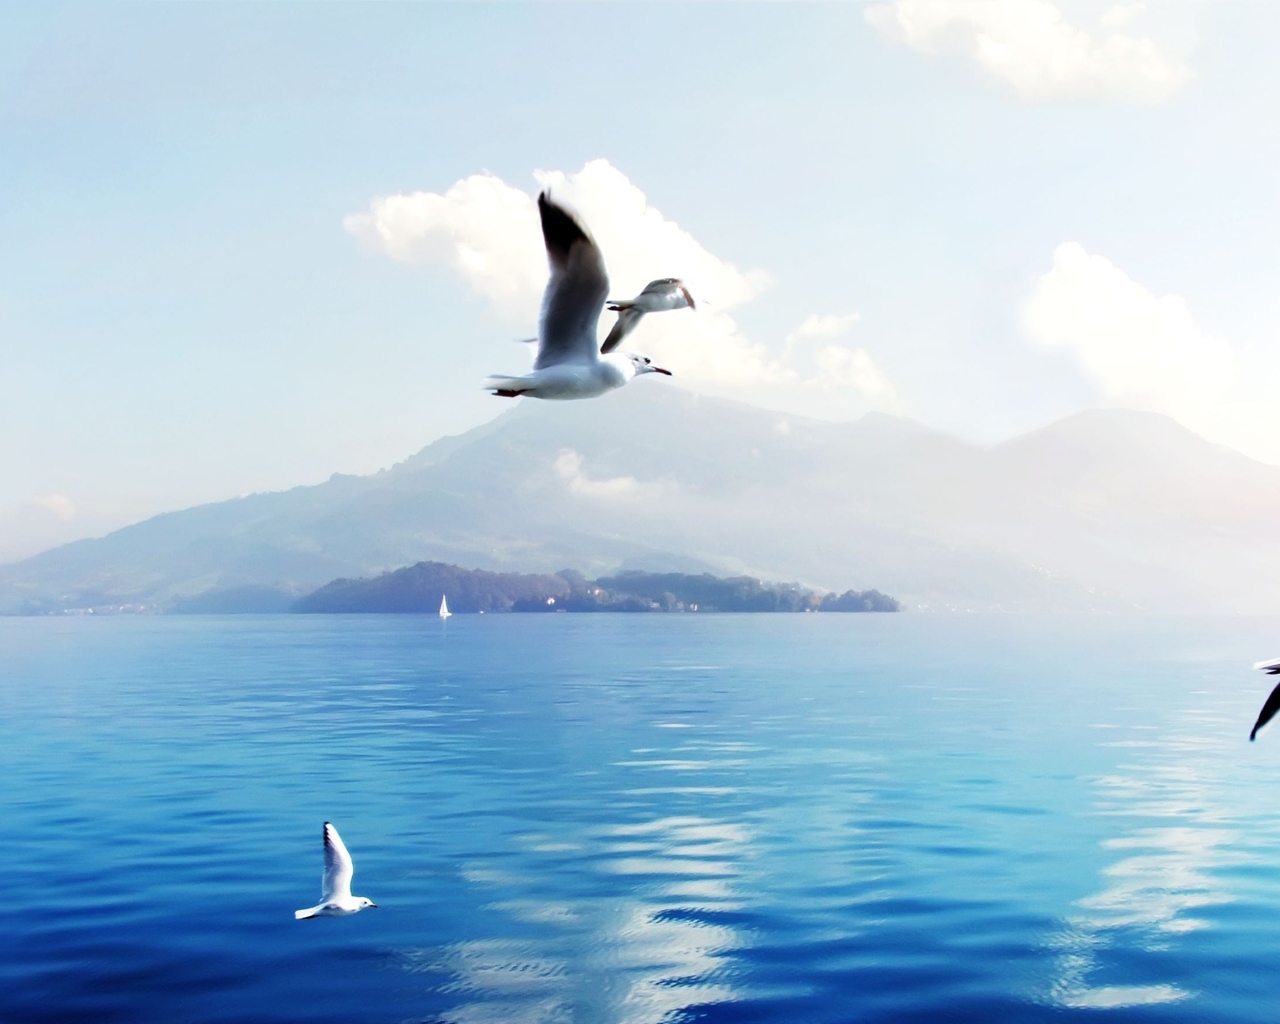 Image: Seagulls, island, fly, sea, water, sky, clouds